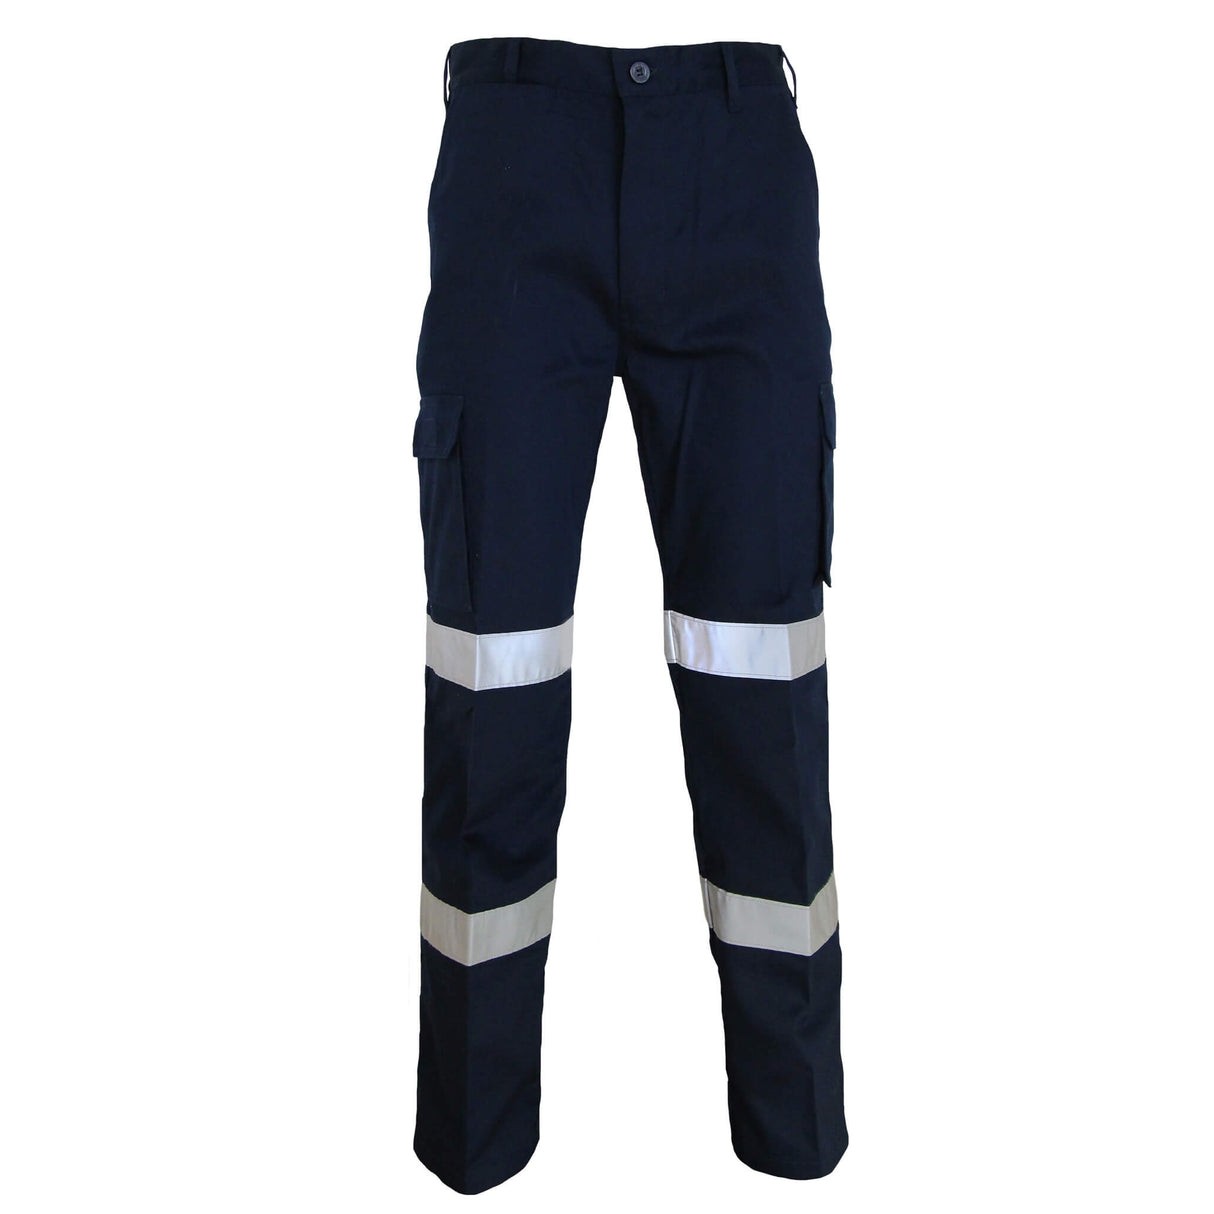 3362 Biomotion Taped Pants